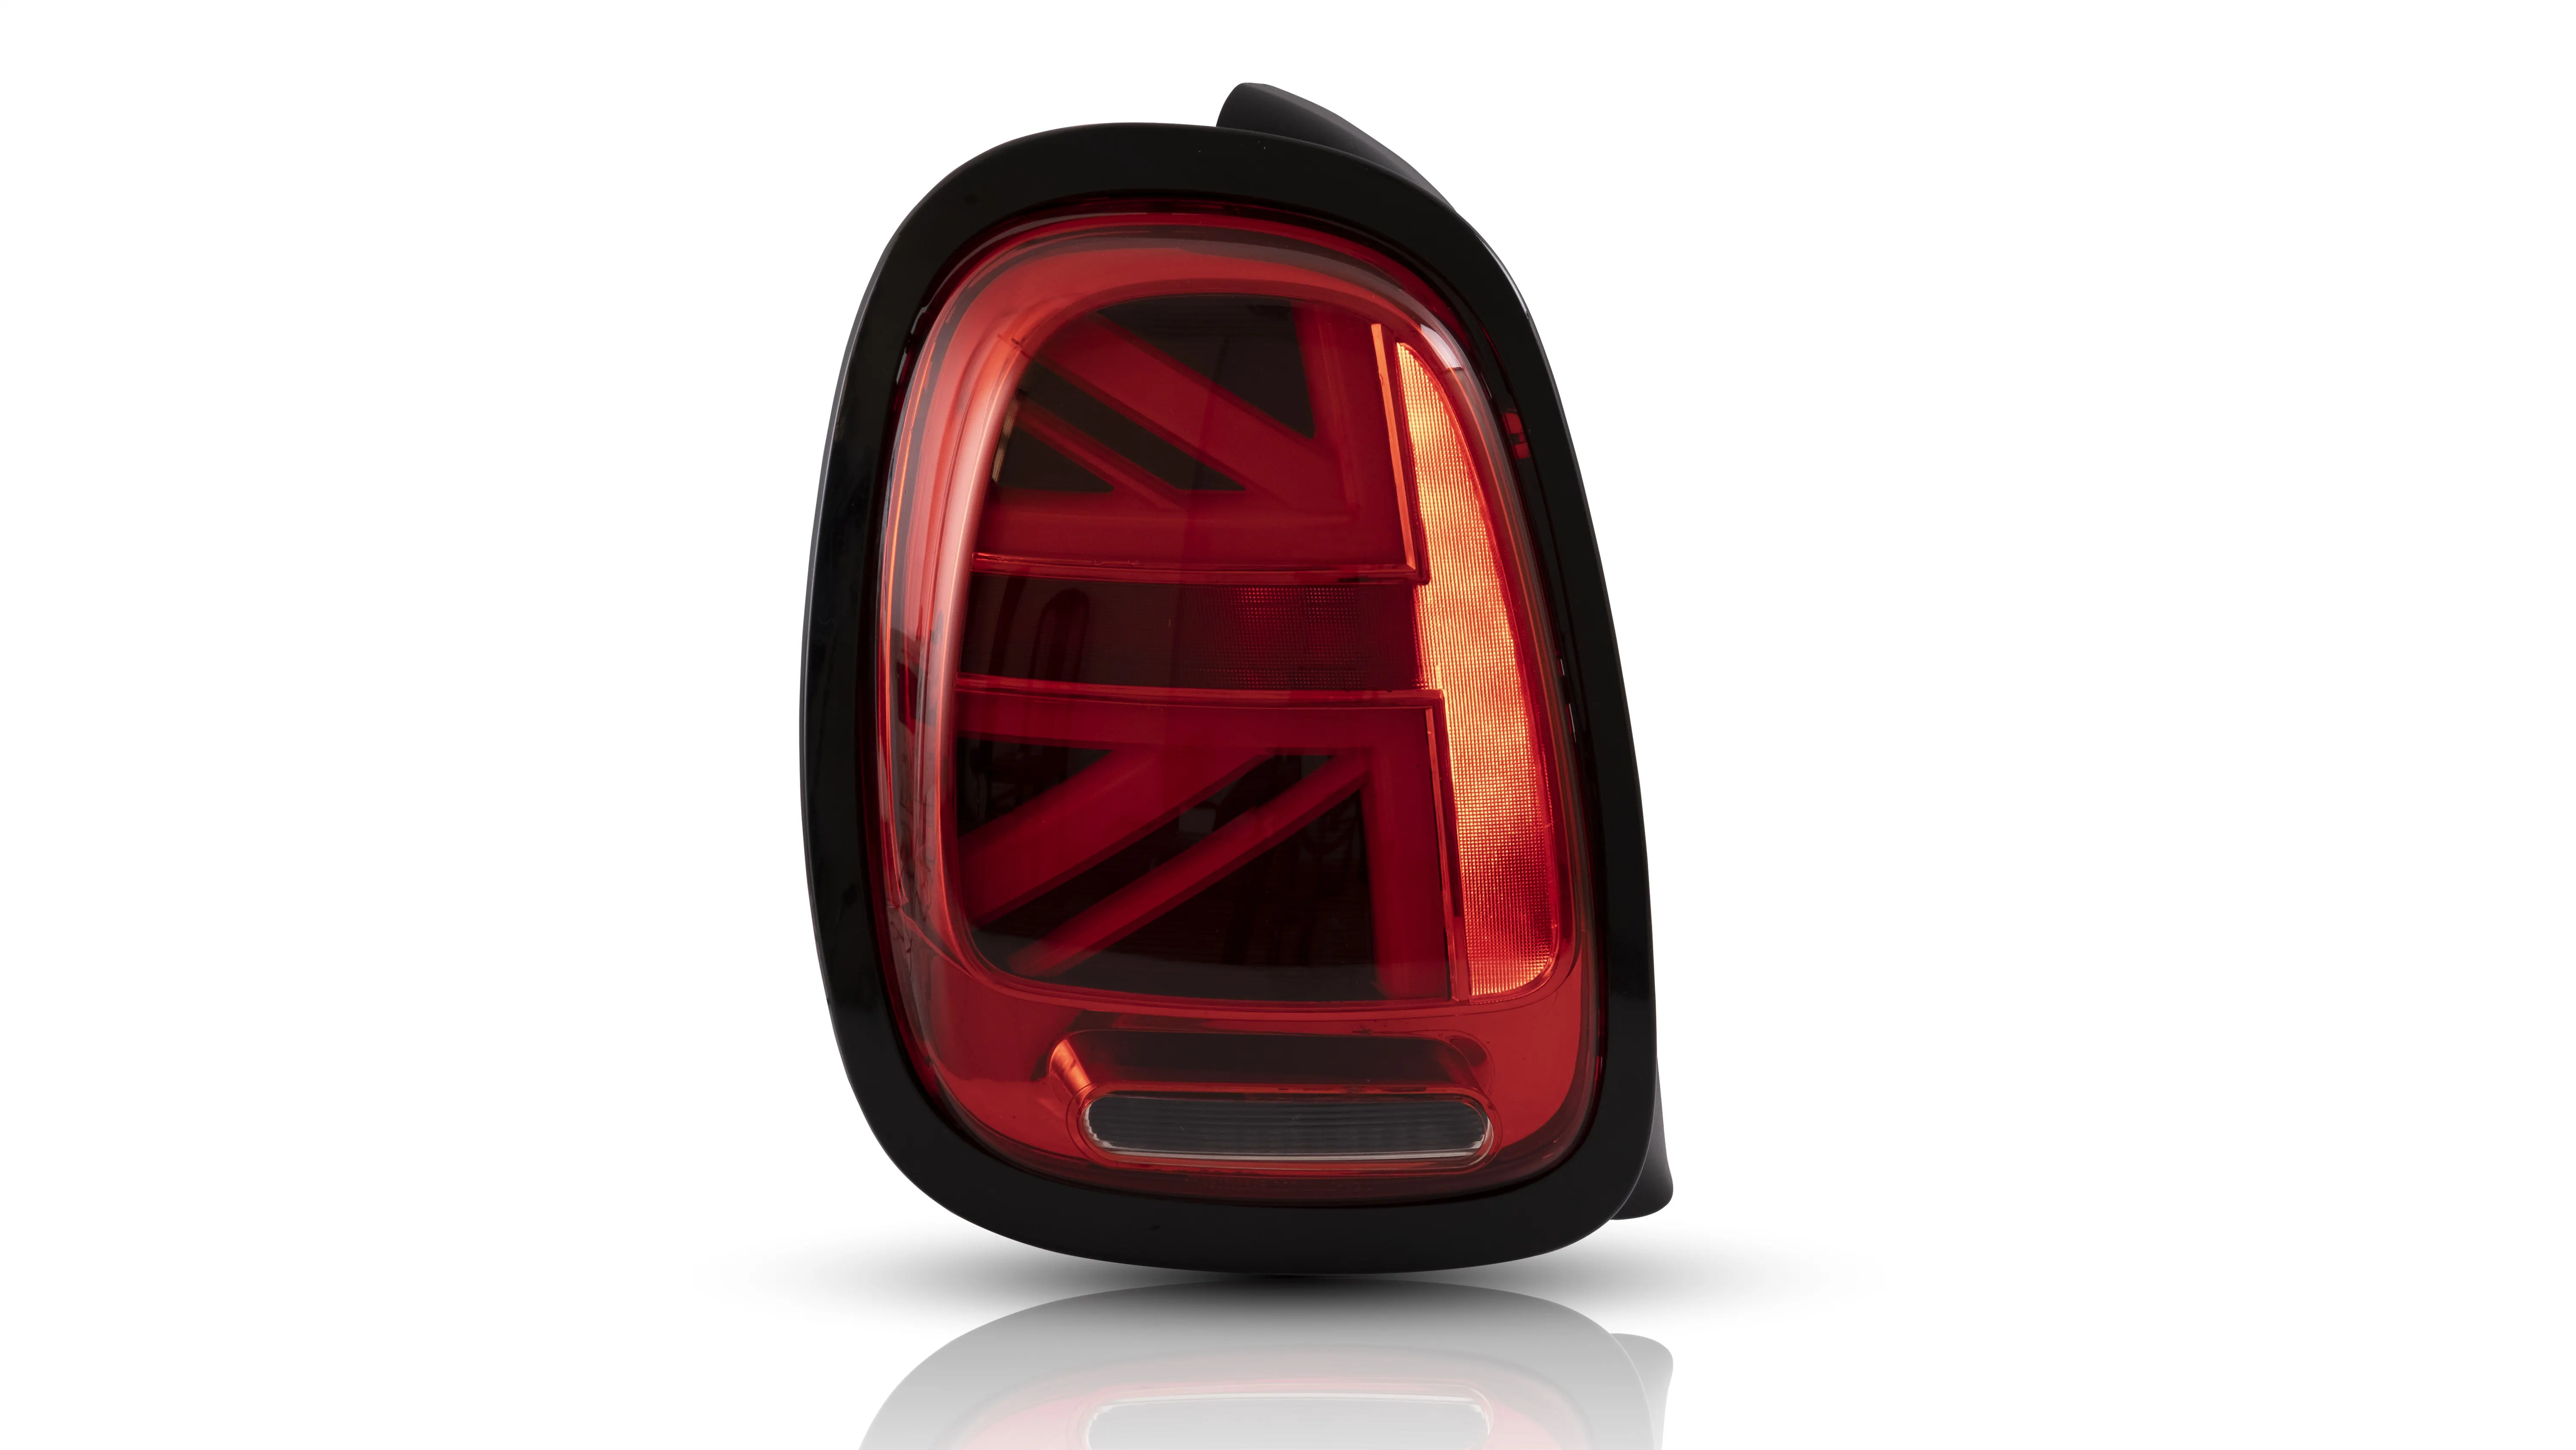 Vland car assembly LED taillight 2014-2019 for F55 F56 F57 tail lights for BMW mini F55 F56 F57 cooper LED rear lamp